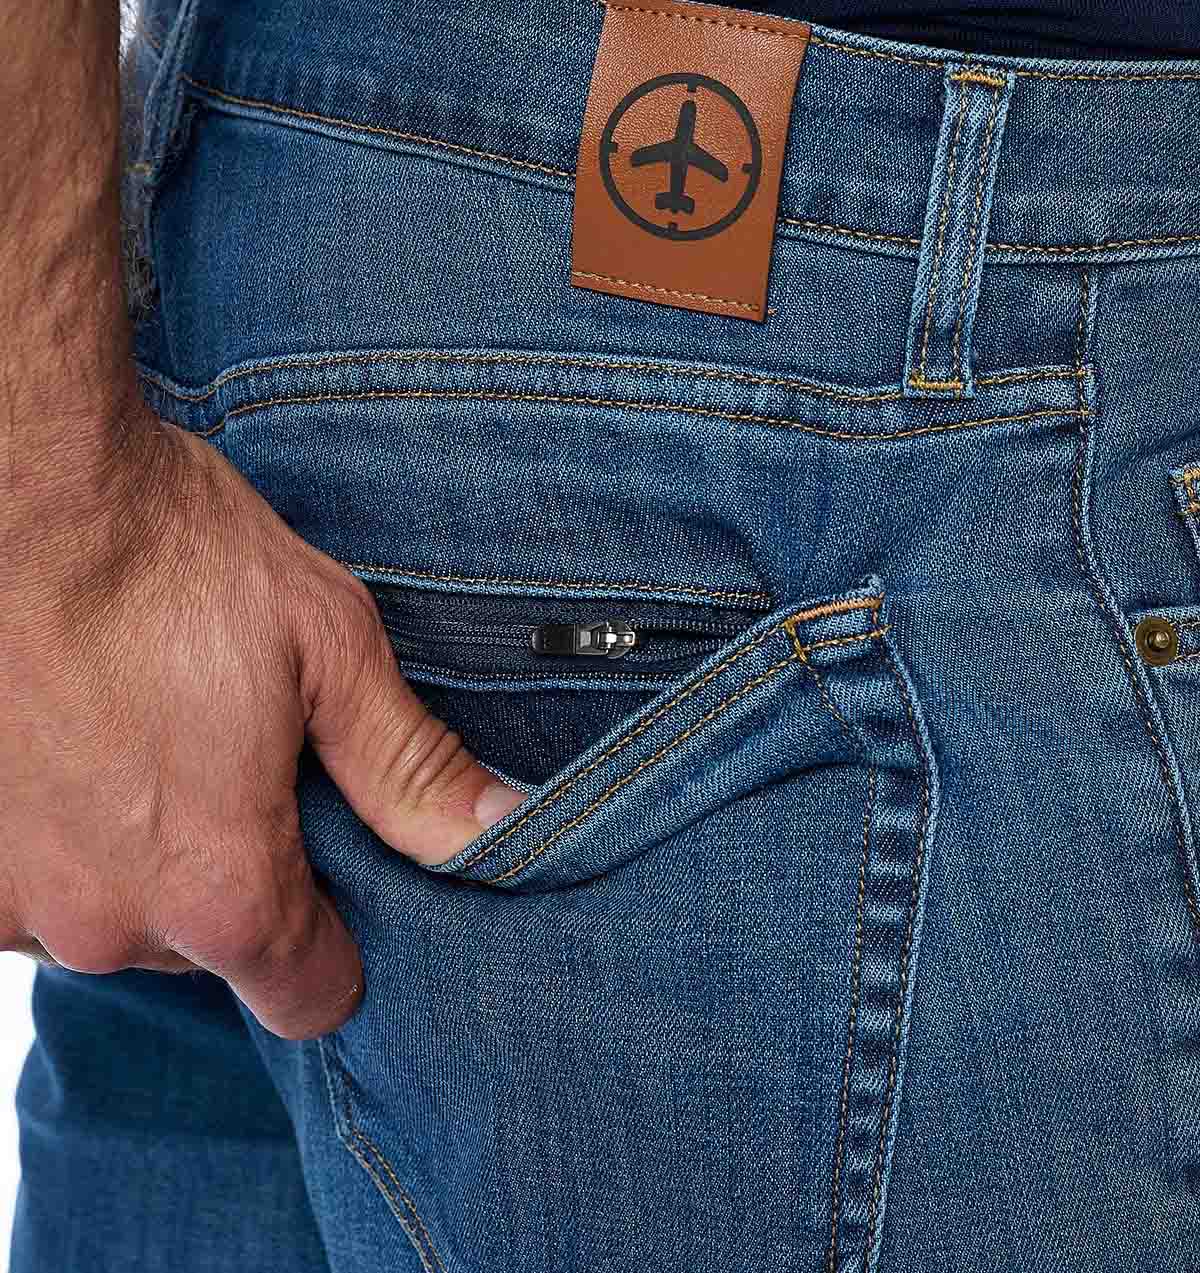 The Best Travel Jeans in the World for Men, Camo